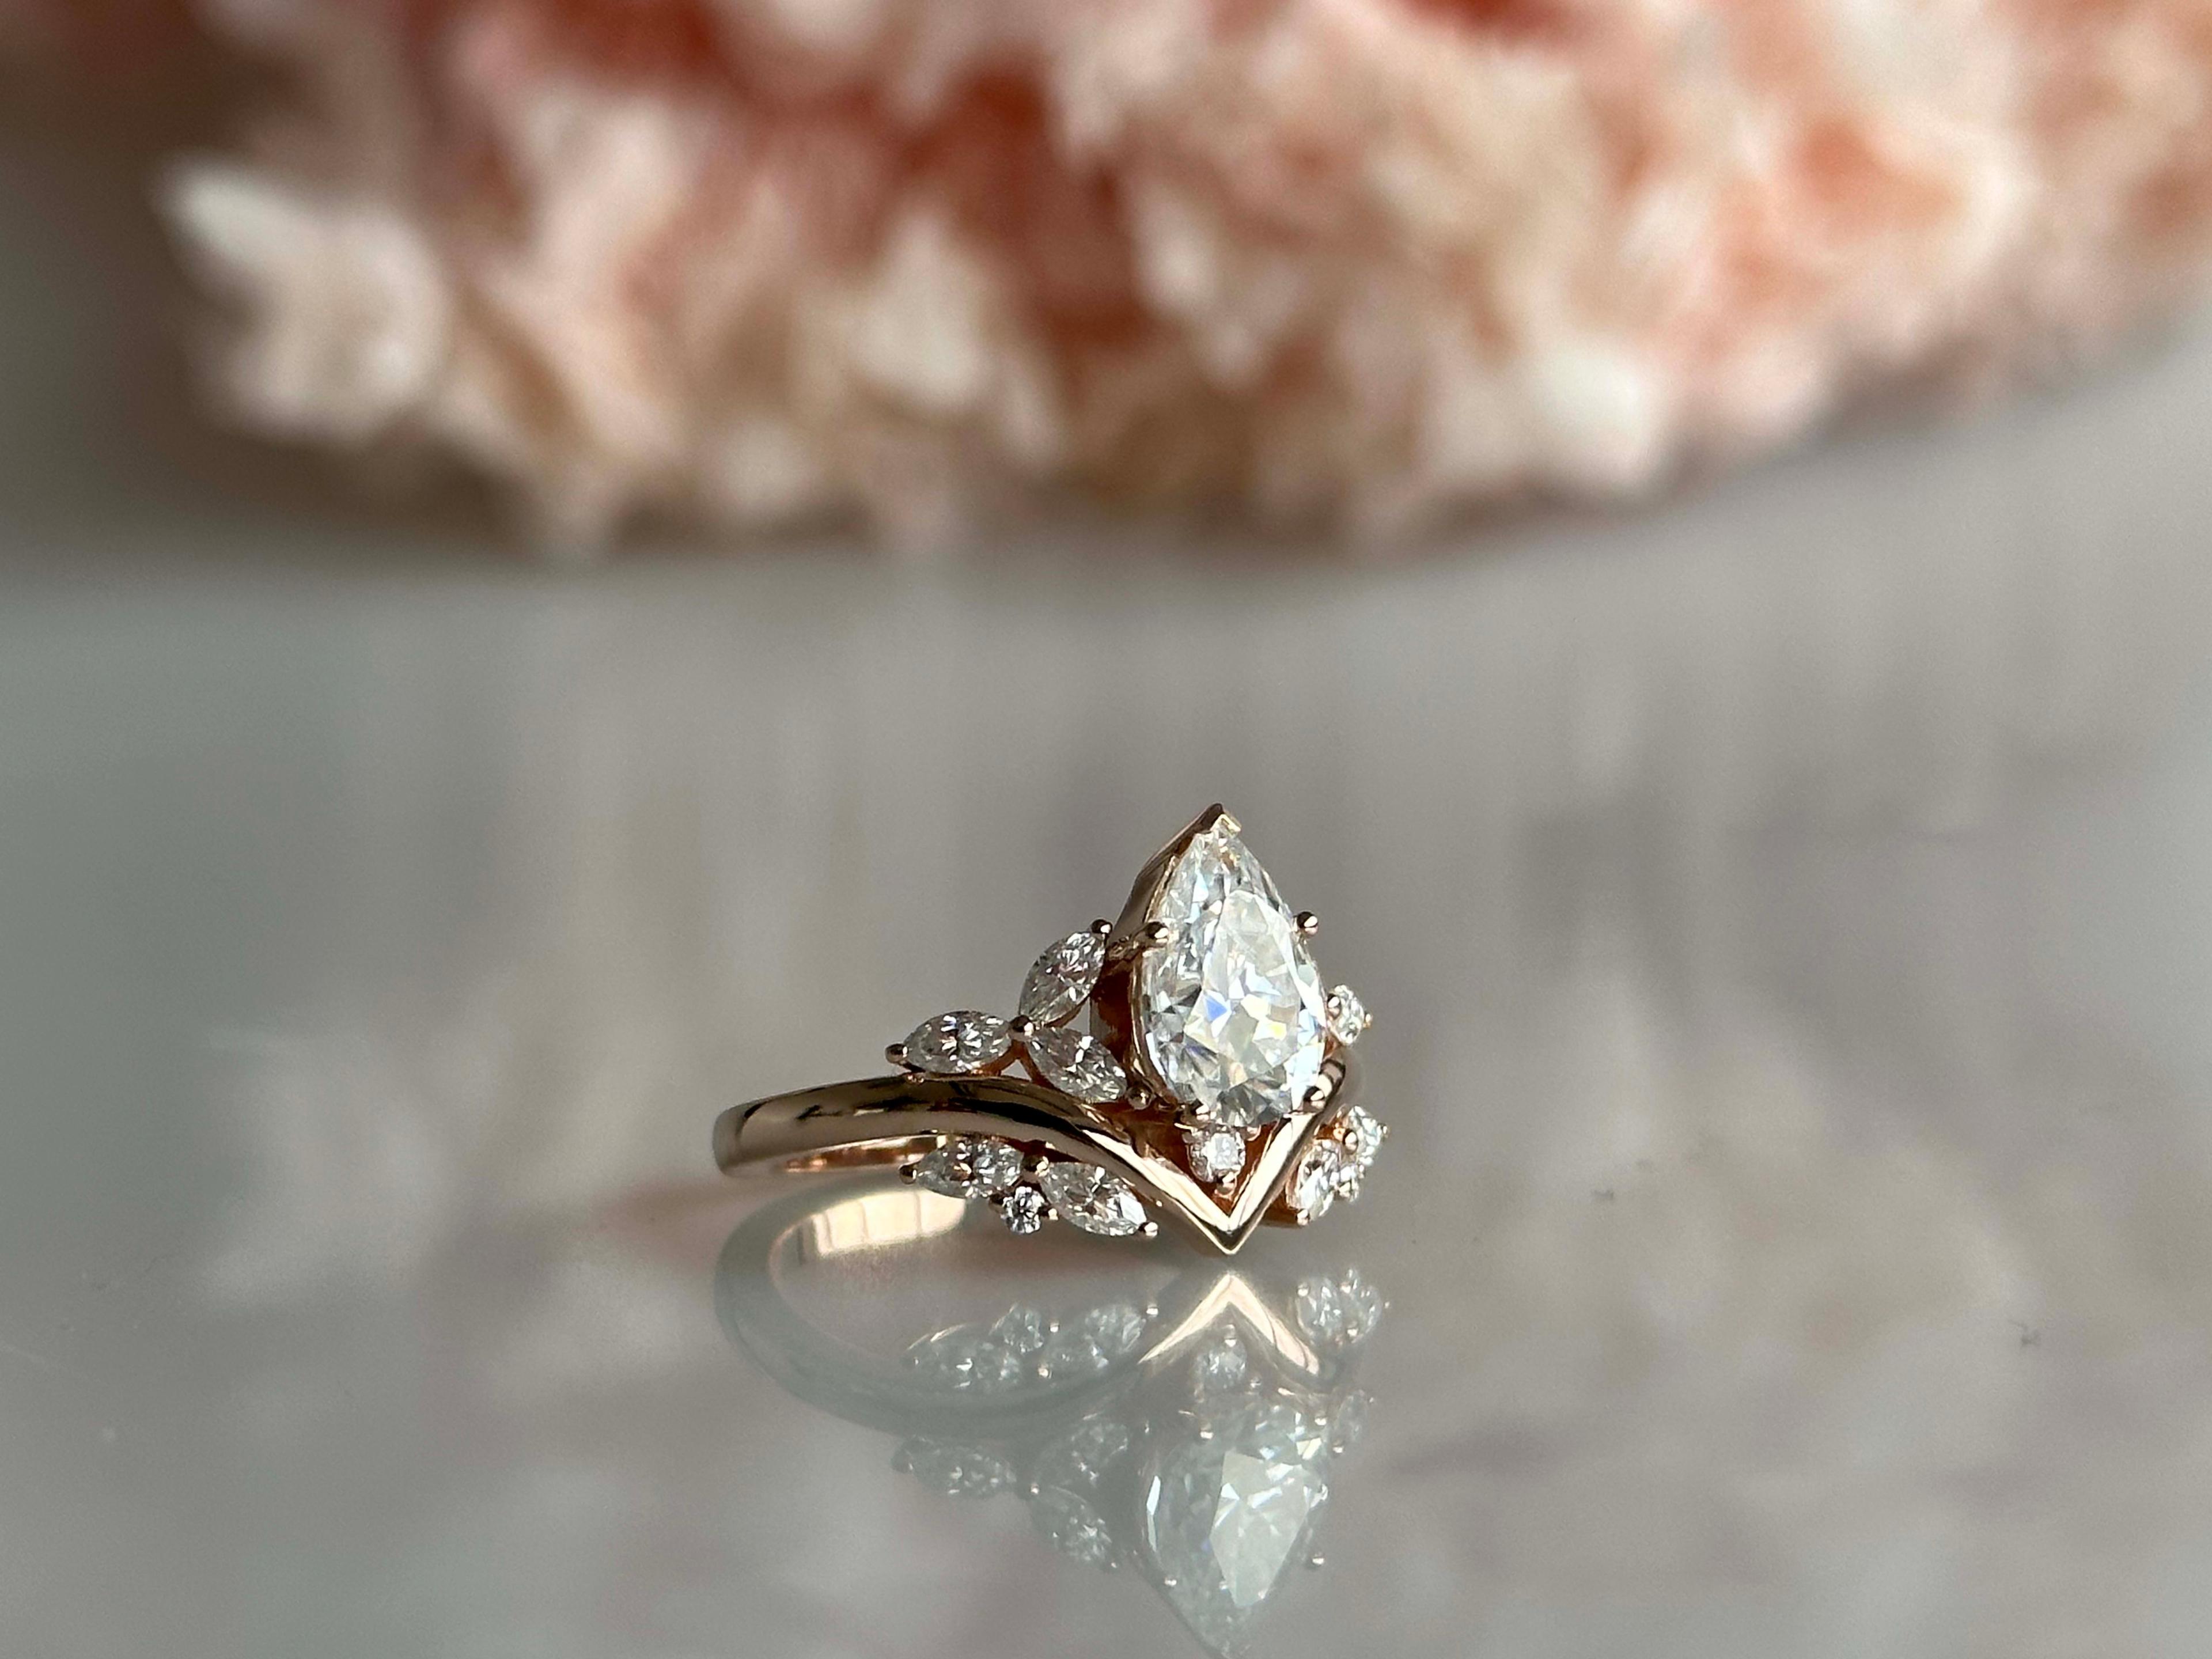 Natural diamonds: 6 Reasons To Reconsider Cover Photo